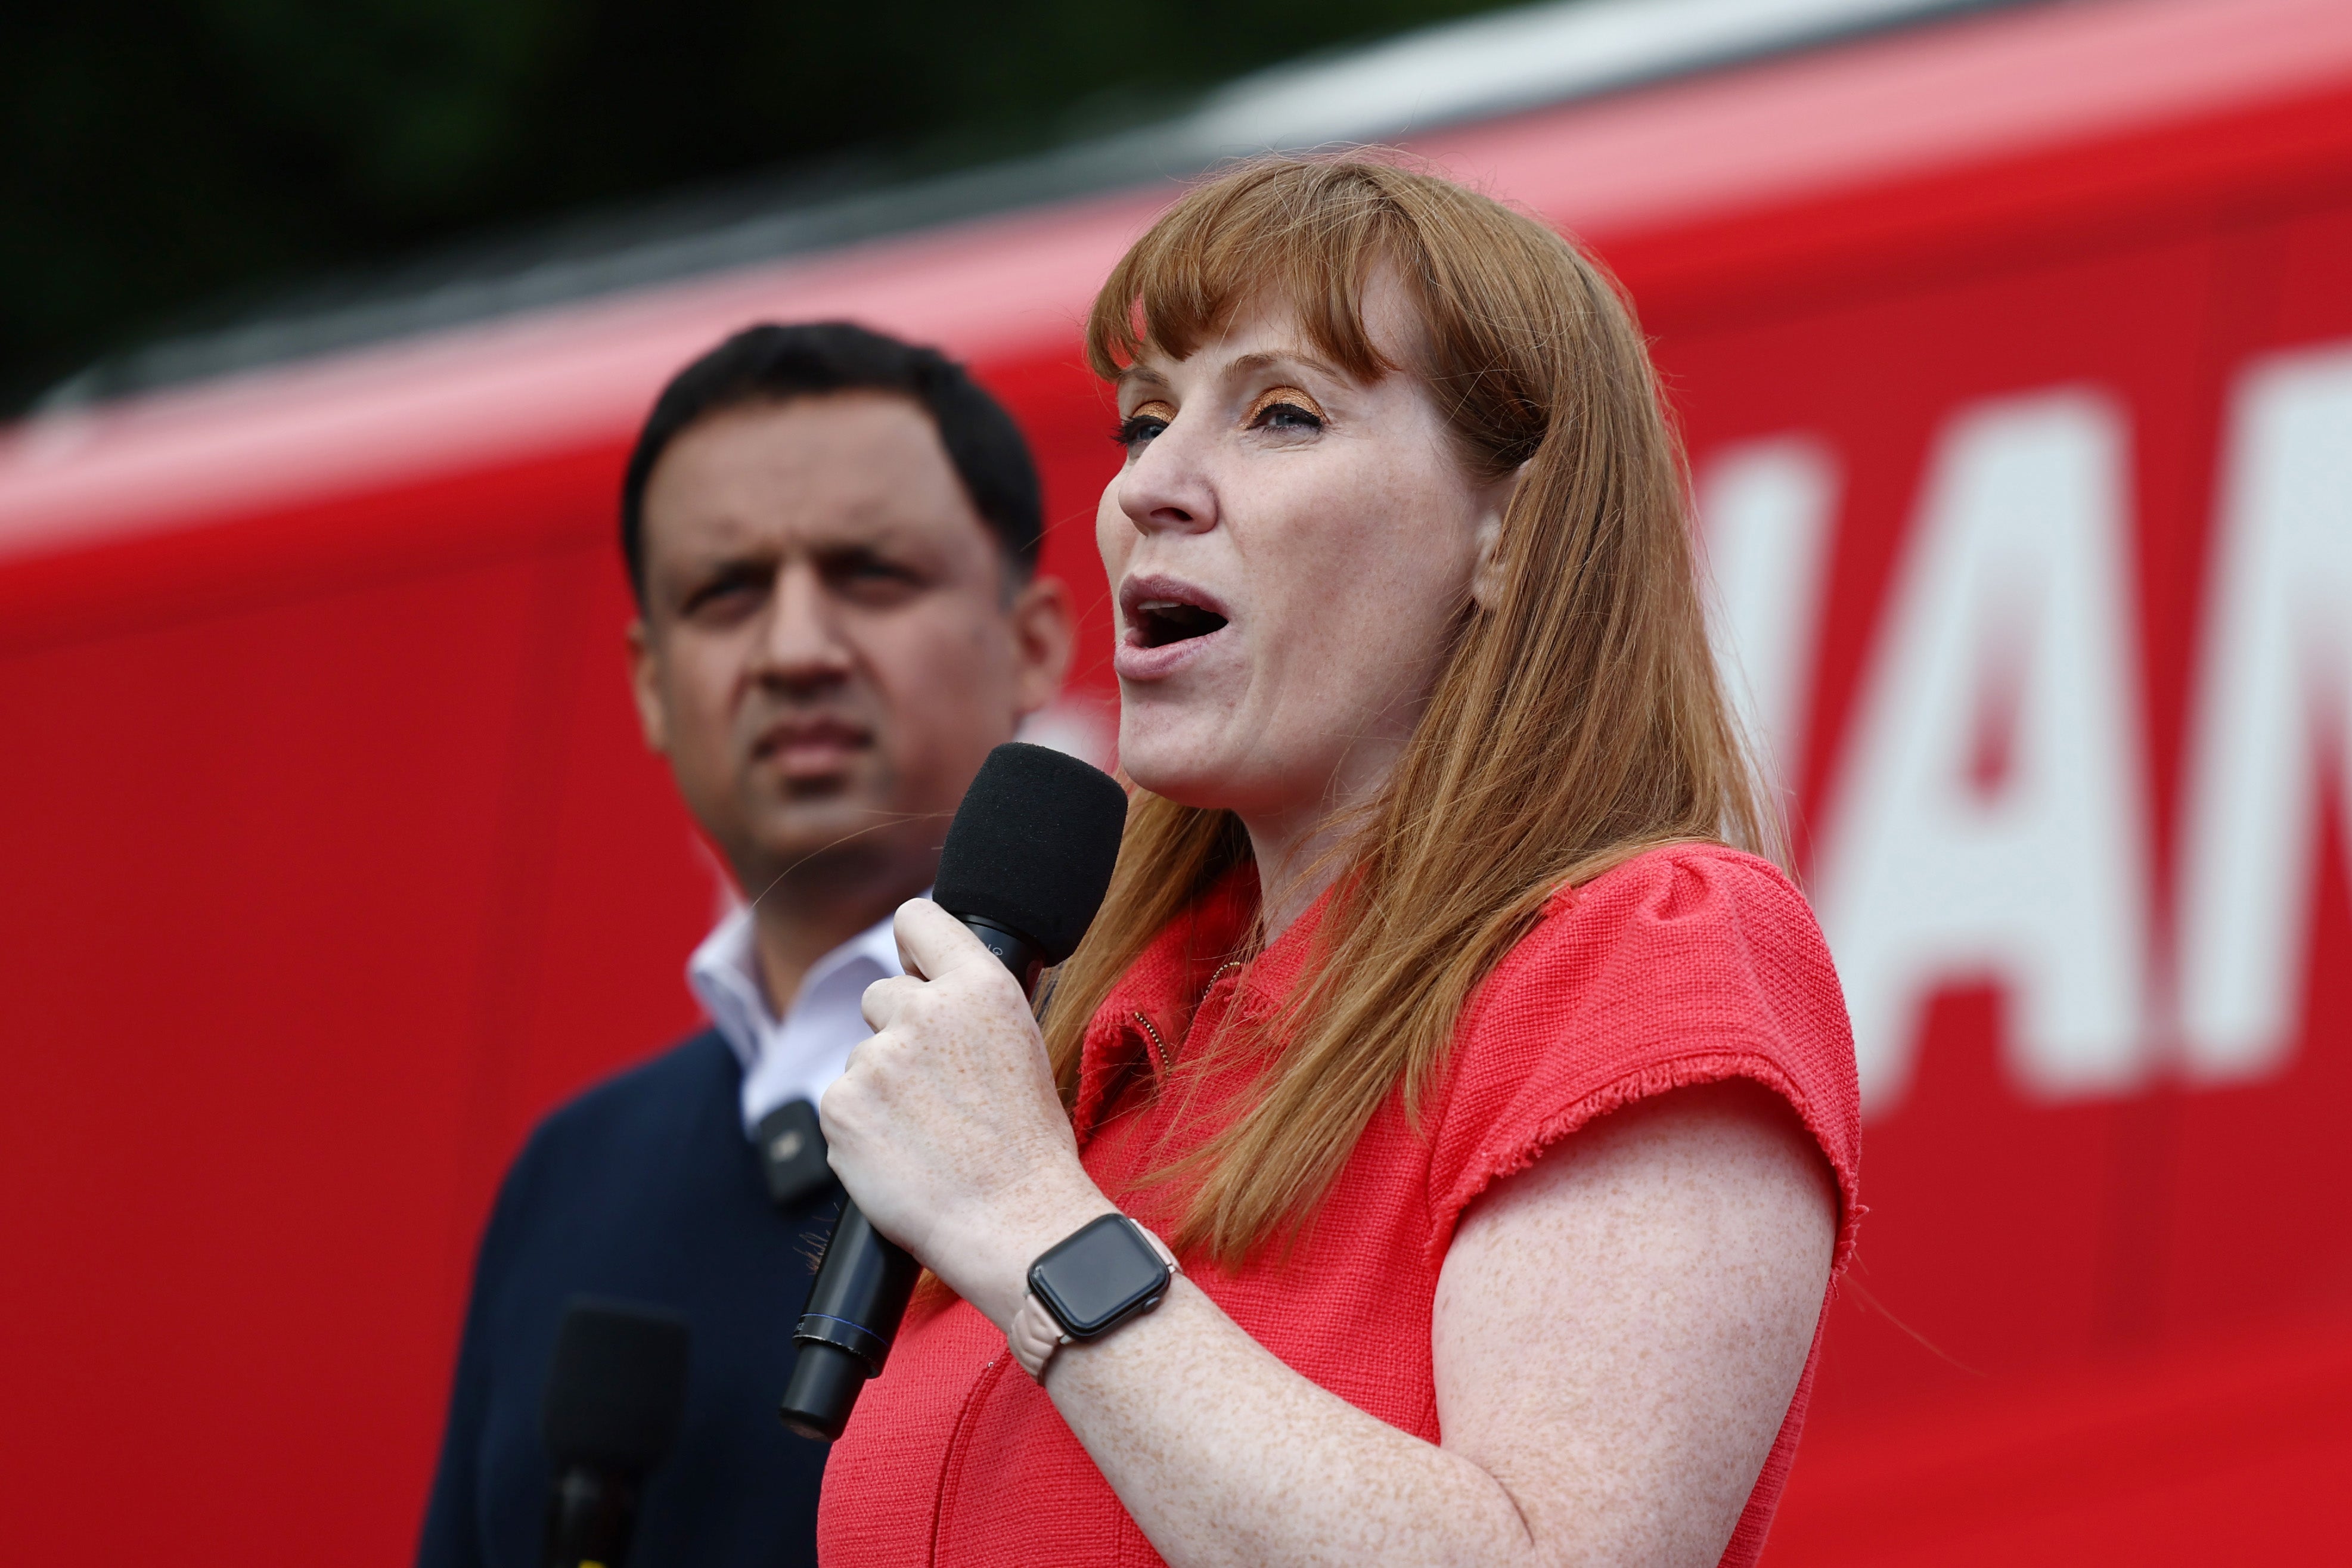 Scottish Labour leader Anas Sarwar and Labour Party deputy leader Angela Rayner speak at a campaign event in Hamilton, Scotland